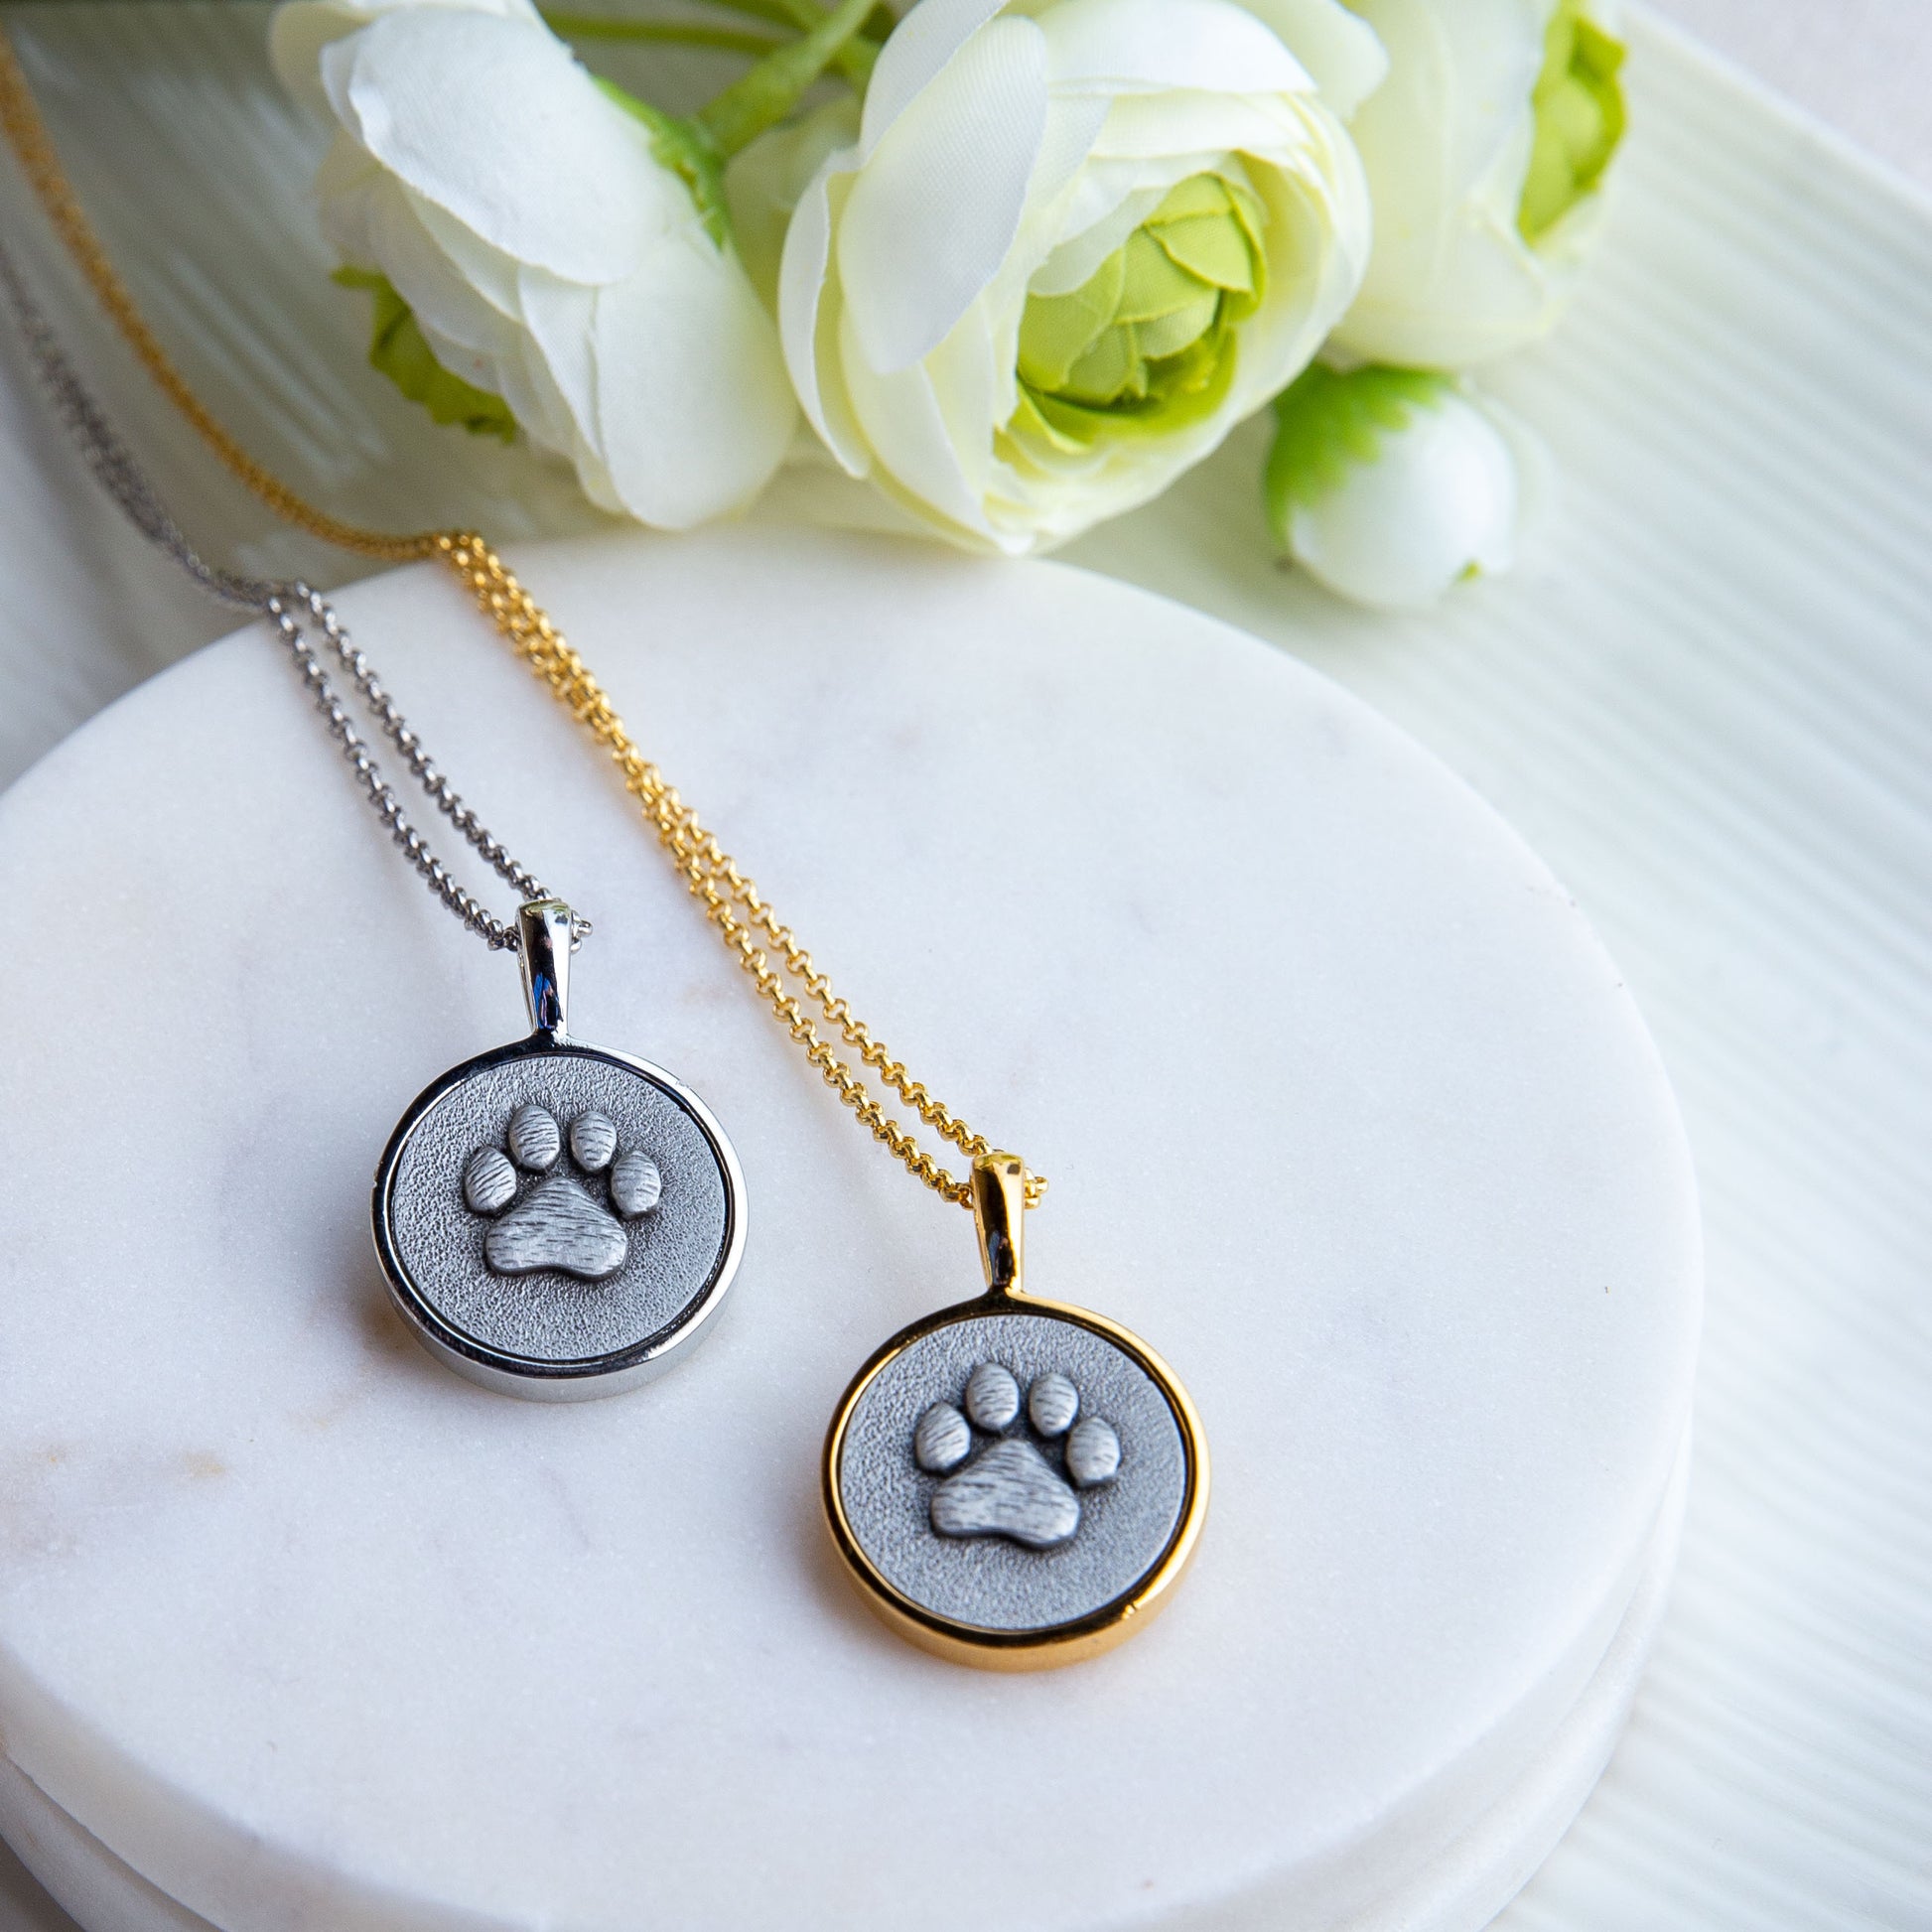 Pawprint Personalized Necklaces in both silver and gold finishes perrrfect gift